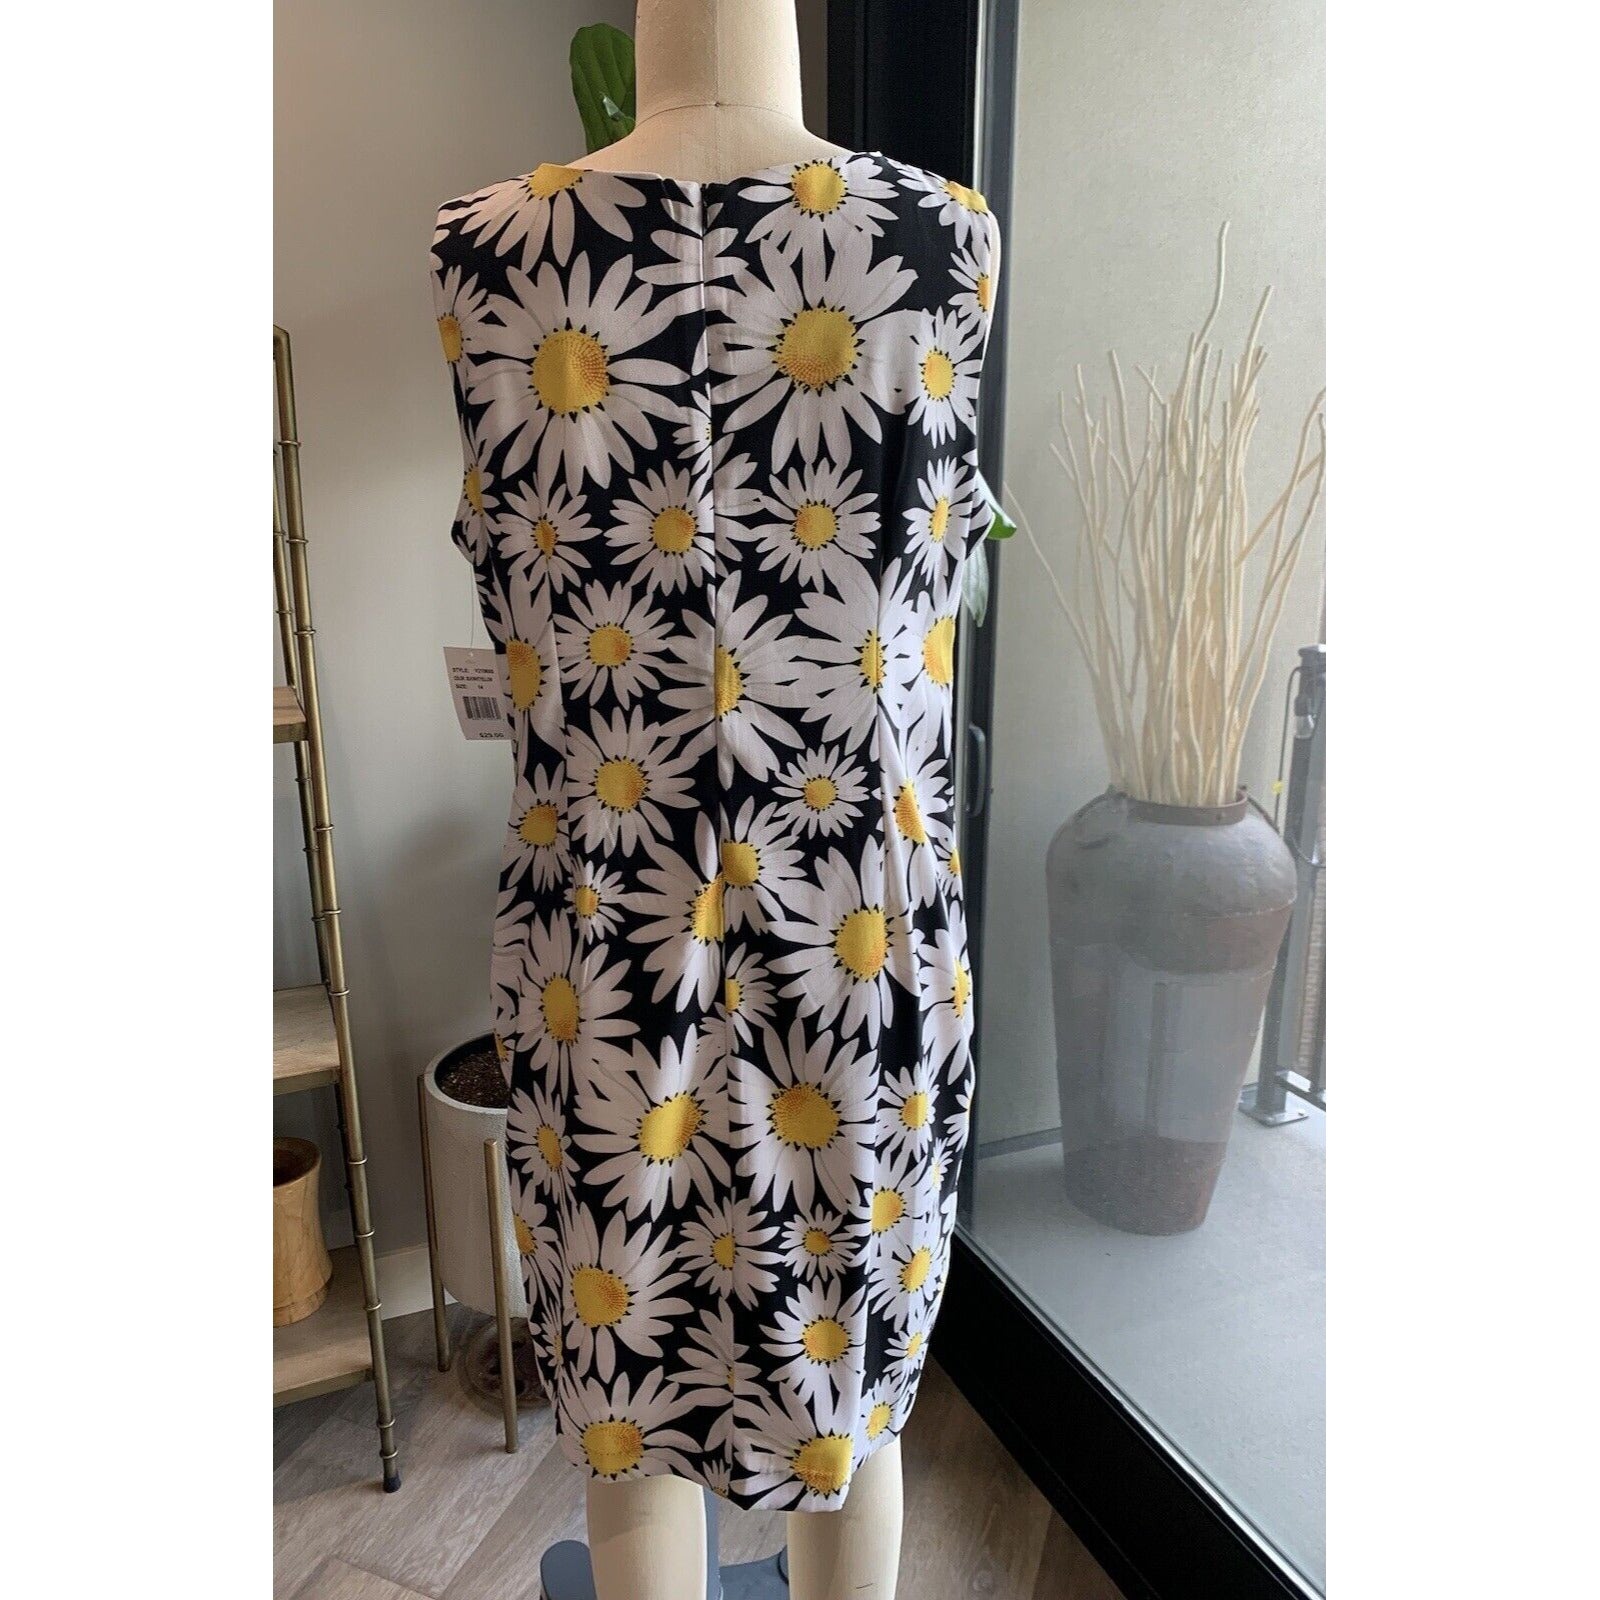 Back View Of Sunflower Printed Dress